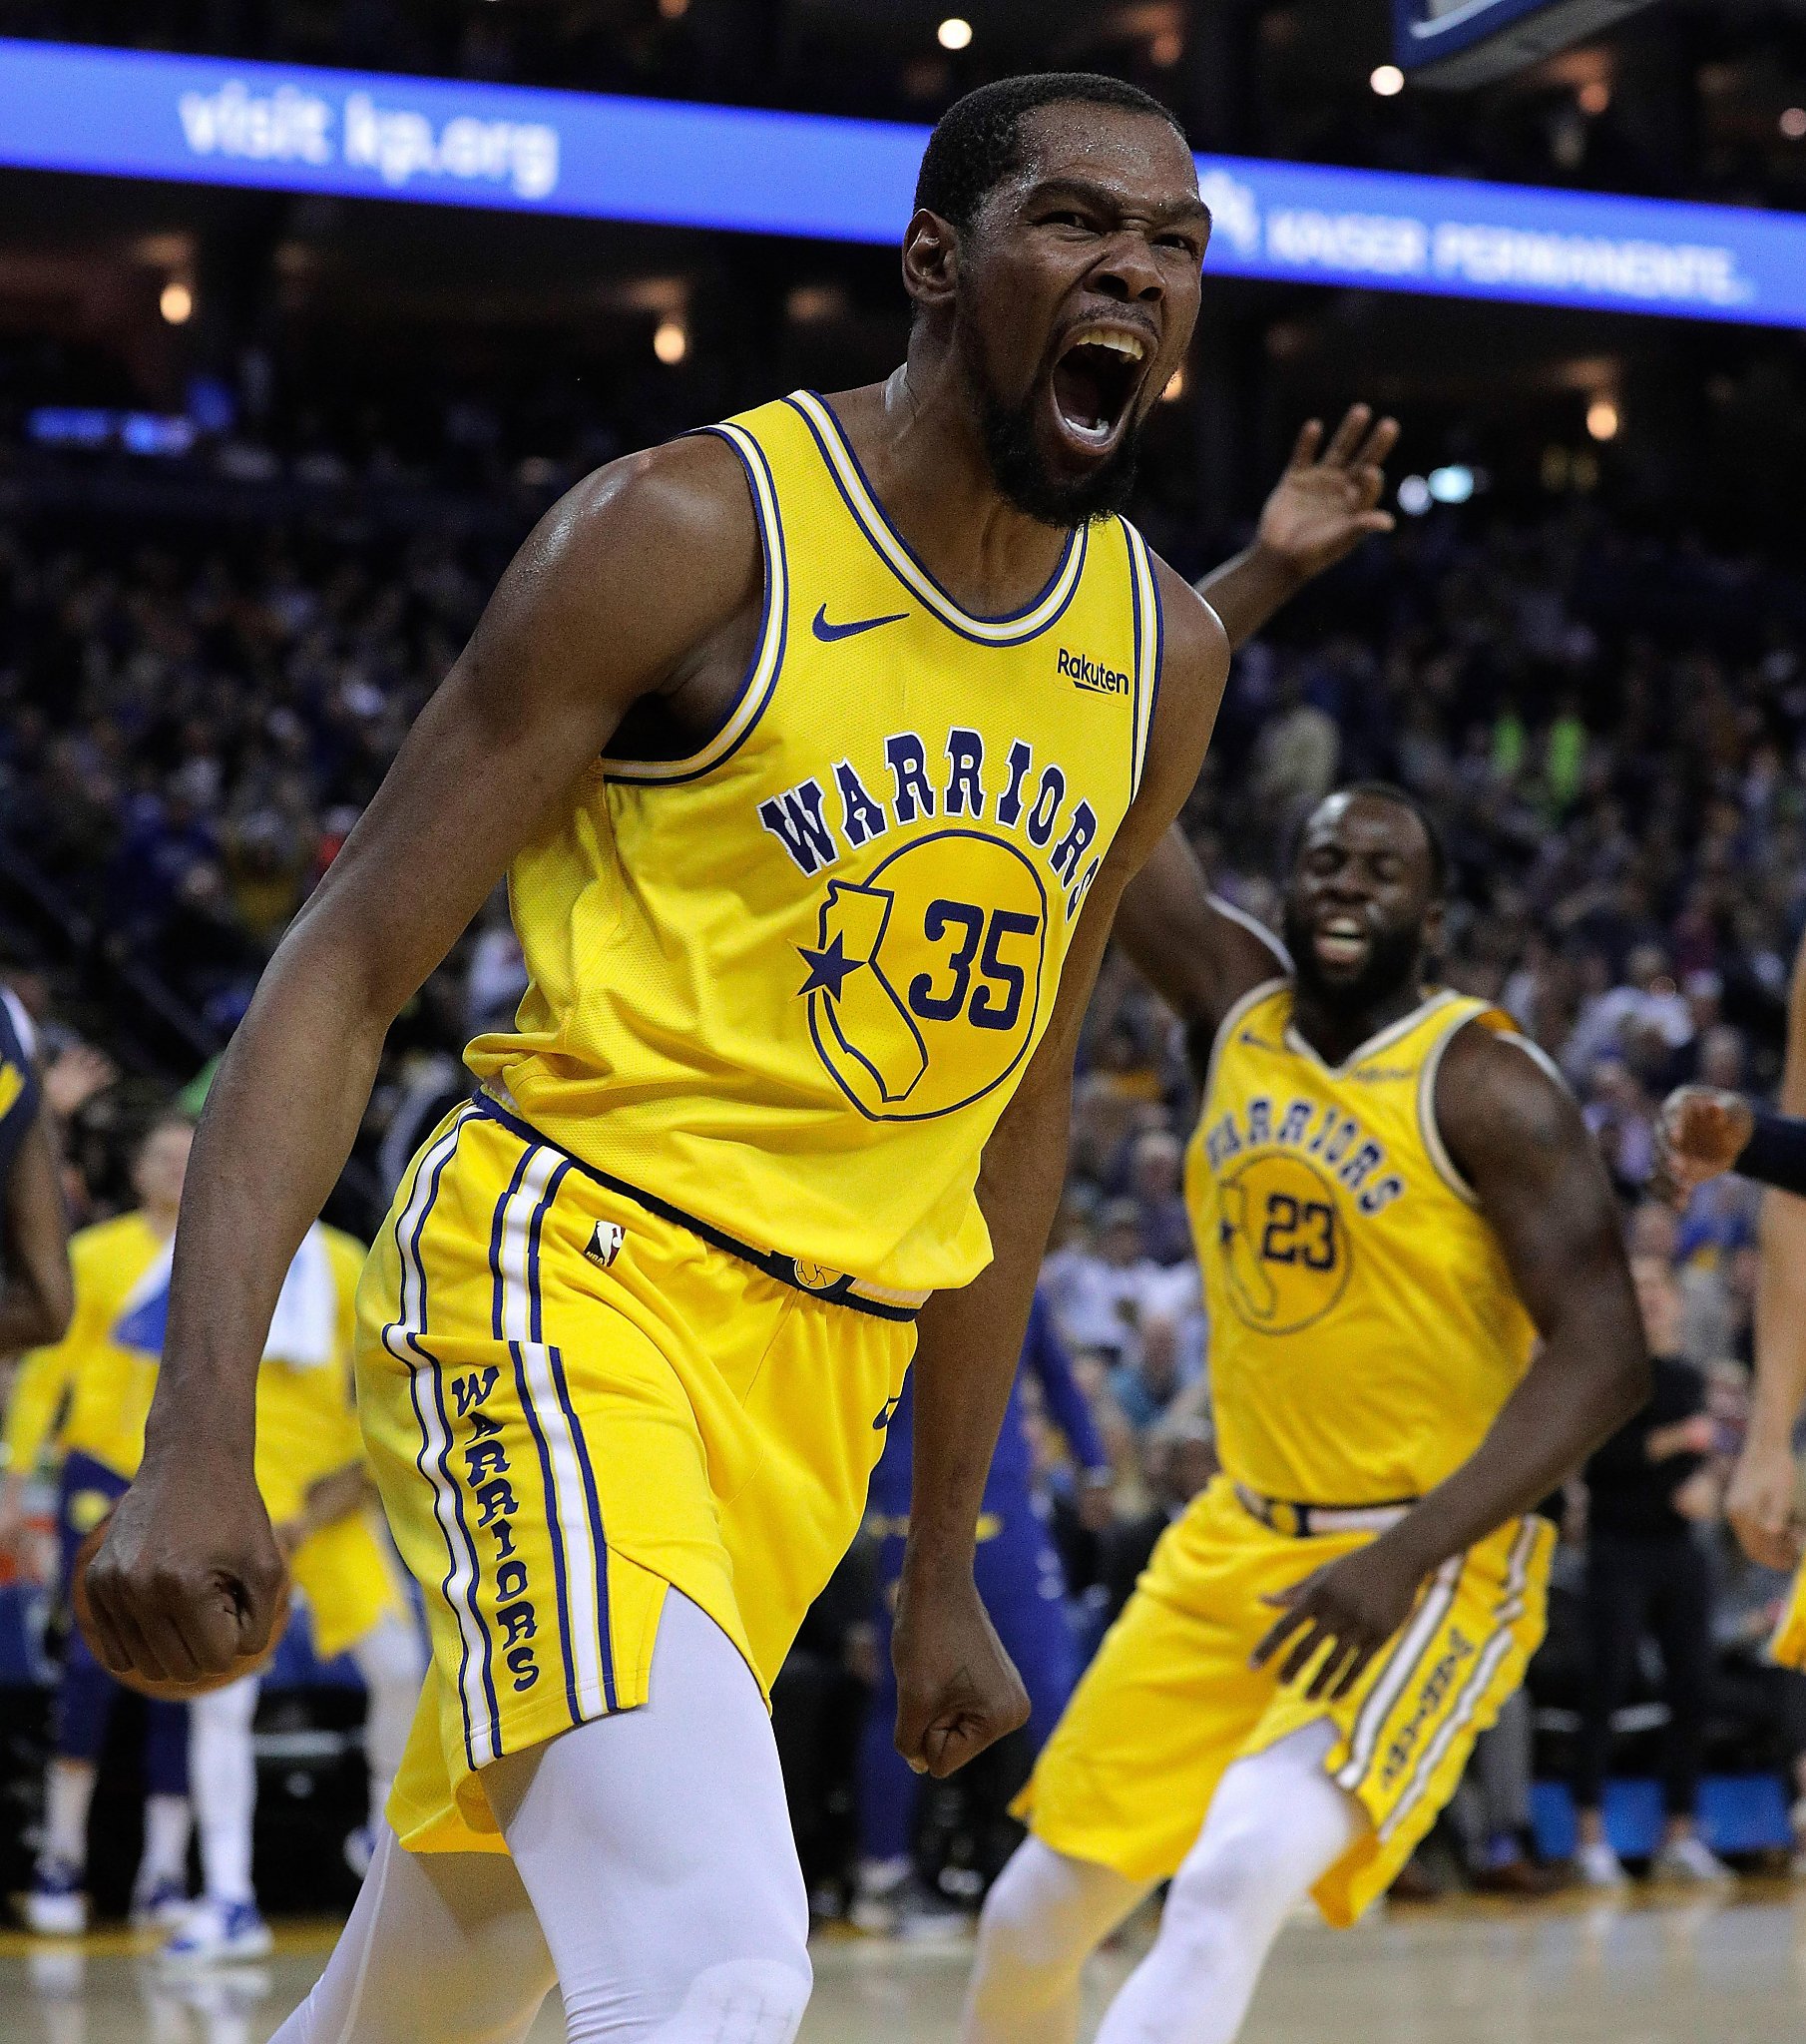 NBA fans had criticism for the Warriors retiring Kevin Durant's number